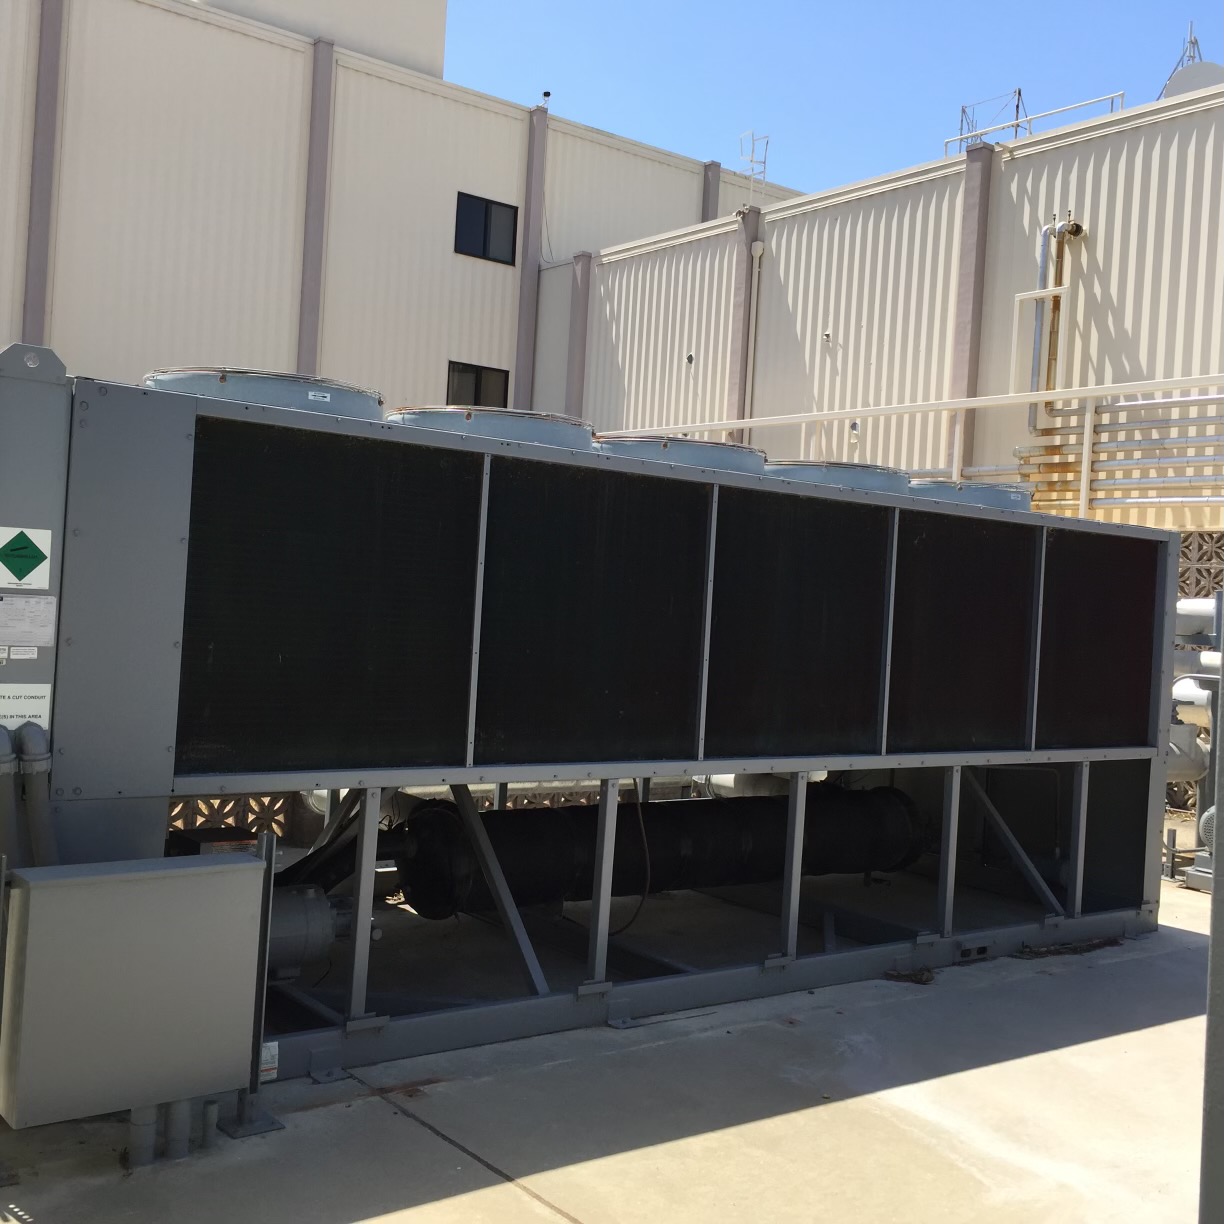 Used Chiller Buyers in Austin TX 